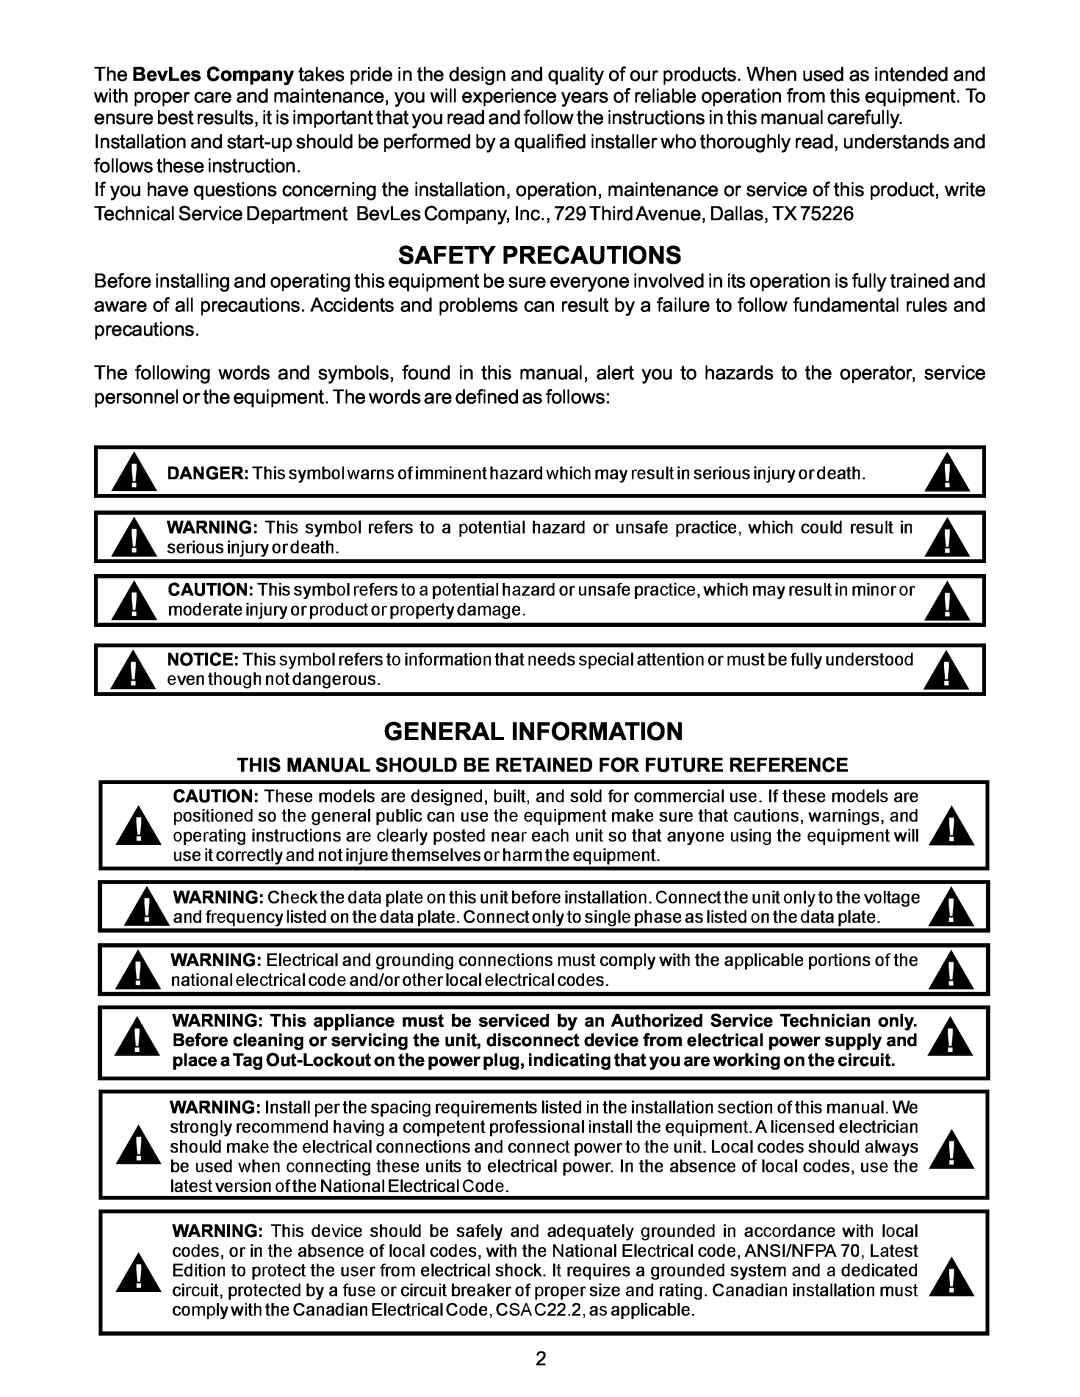 Bakers Pride Oven PHC23-AR12, PHC23-AR10 operating instructions Safety Precautions, General Information 